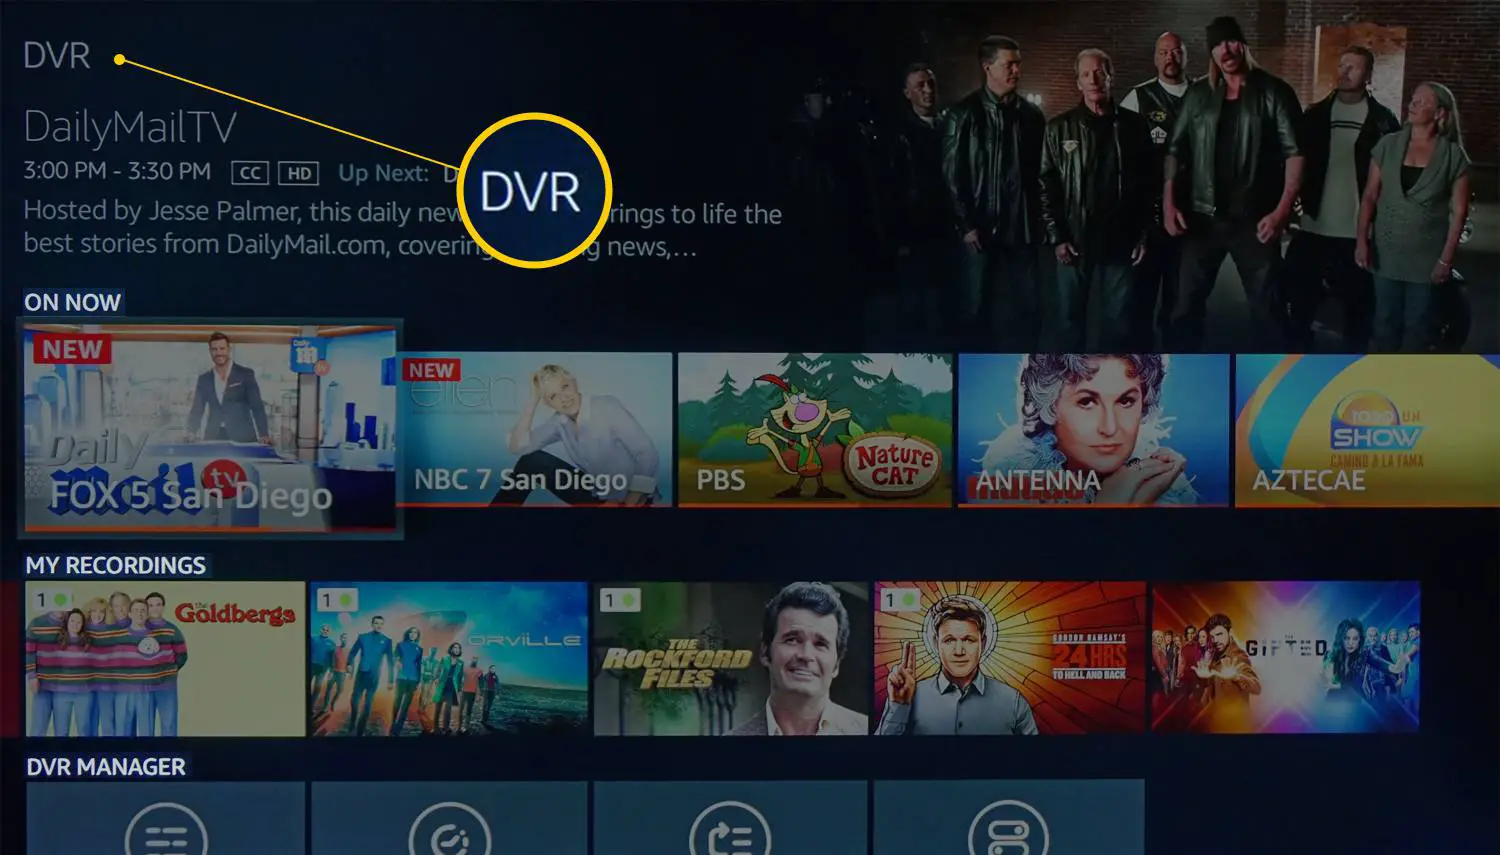 Fire TV Recast - On Now, Recordings, DVR Manager Rows